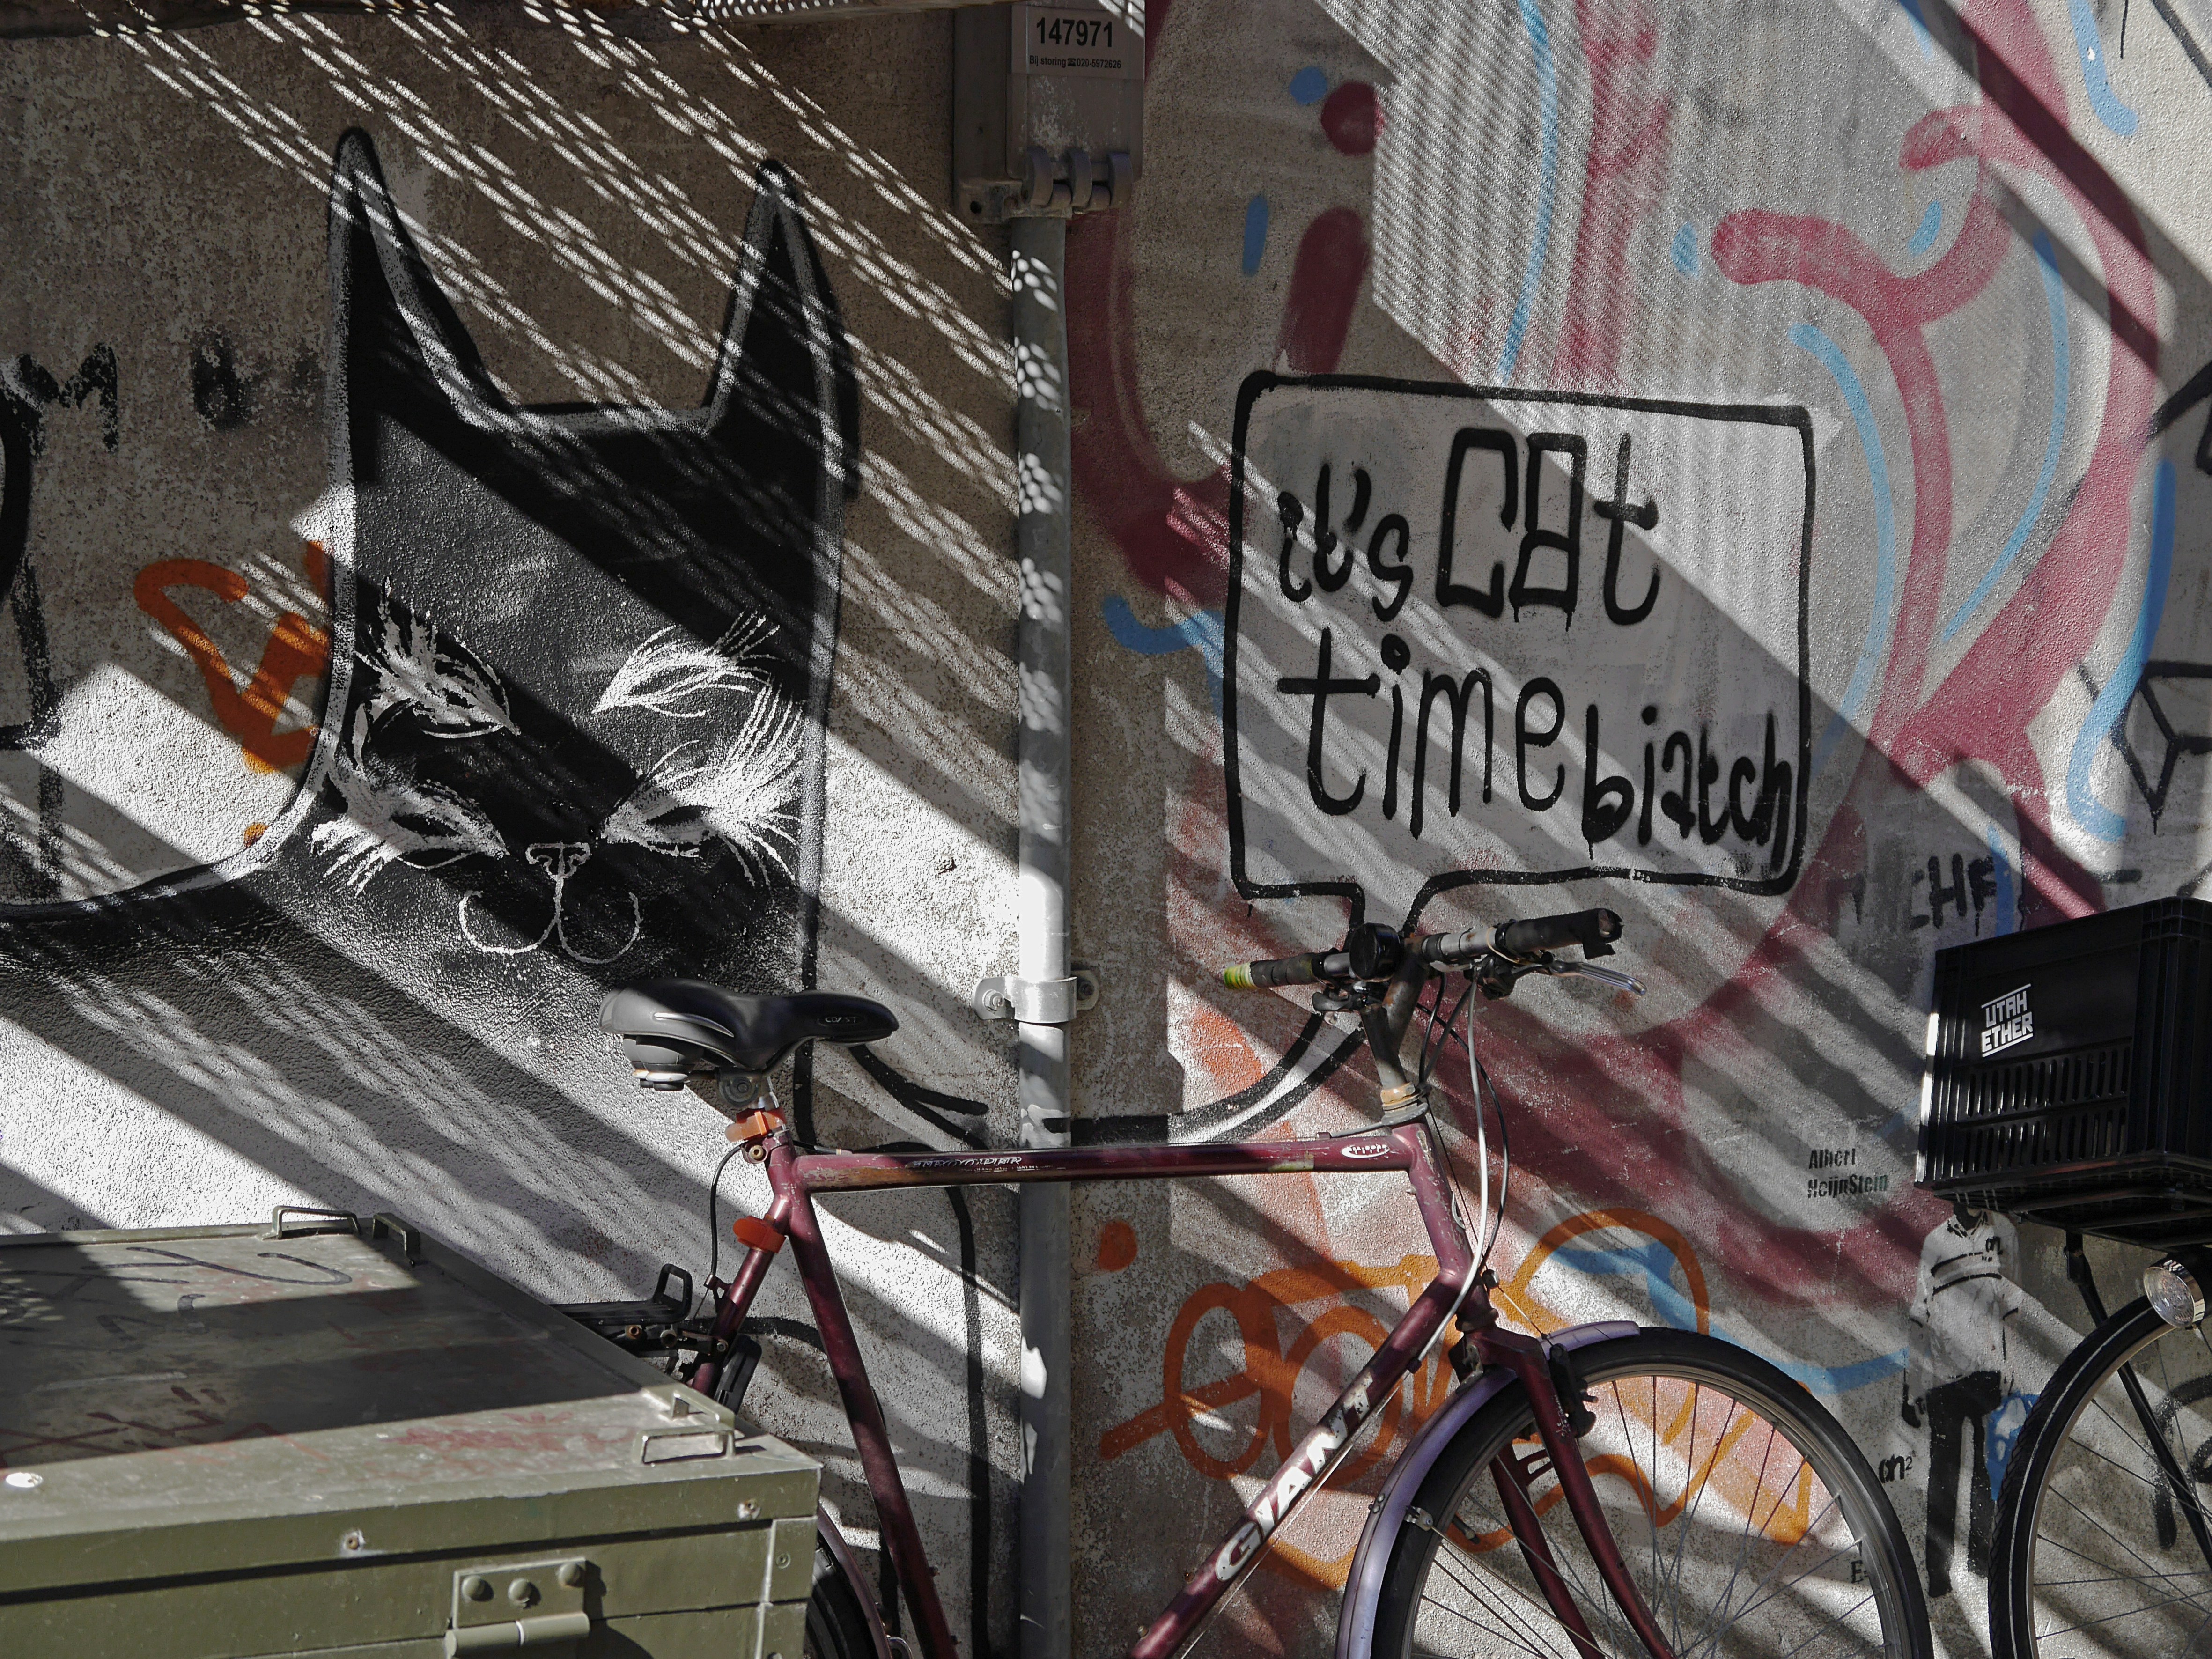 Amsterdam street photo of city art & graffiti, free download - It's CAT time! Sprayed wall painting in black-white: a cat waiting above a parked bicycle. A picture with diagonal beams of shadows of anoutdoor stairs and with strong contrasts in the image, because it was a sunny day in Autumn, october 2016. Fons Heijnsbroek, street photography in Amsterdam city, The Netherlands in high resolution; free image CC0. dutch: straatfotografie van graffiti-muur met kat en fietsen in zonlicht in Amsterdam, Nederland - hoge resolutie en rechtenvrij, gratis free download foto, Fons Heijnsbroek, CCO